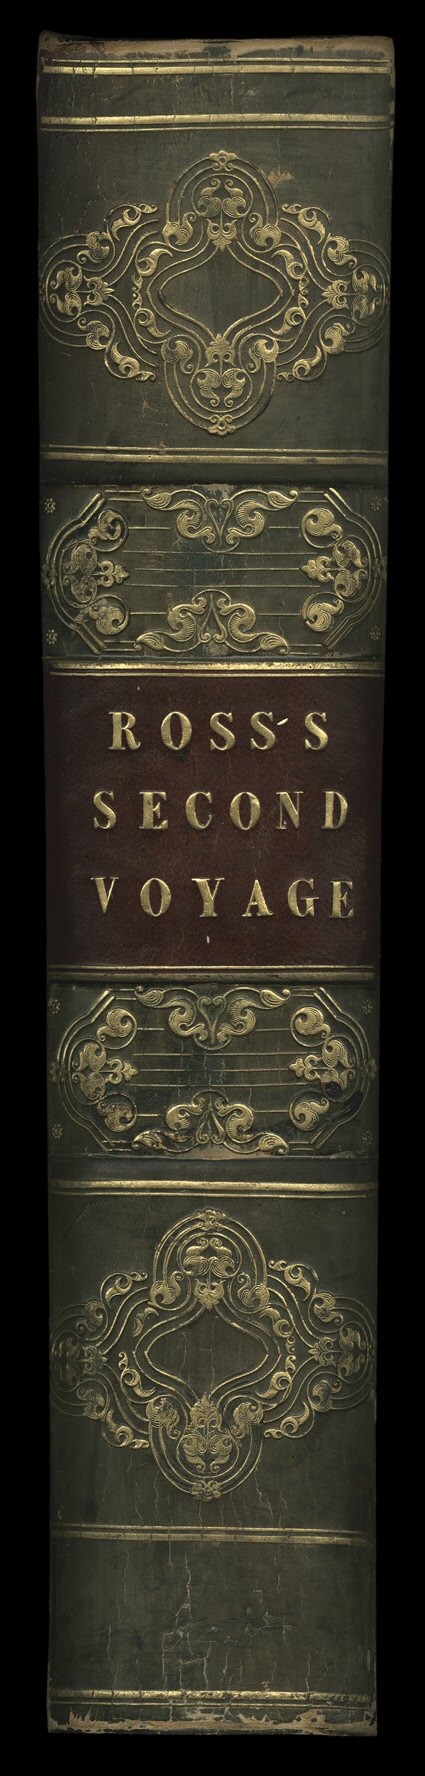 Narrative of a Second voyage in Search of a North-West Passage…, Ross, Sir John. London, A.W. Webster, 1835. First edition. 4to, half leather and cloth, gilt spine, marbled
endpapers. Folding map partly hand-colored, 31 maps and plates, nine